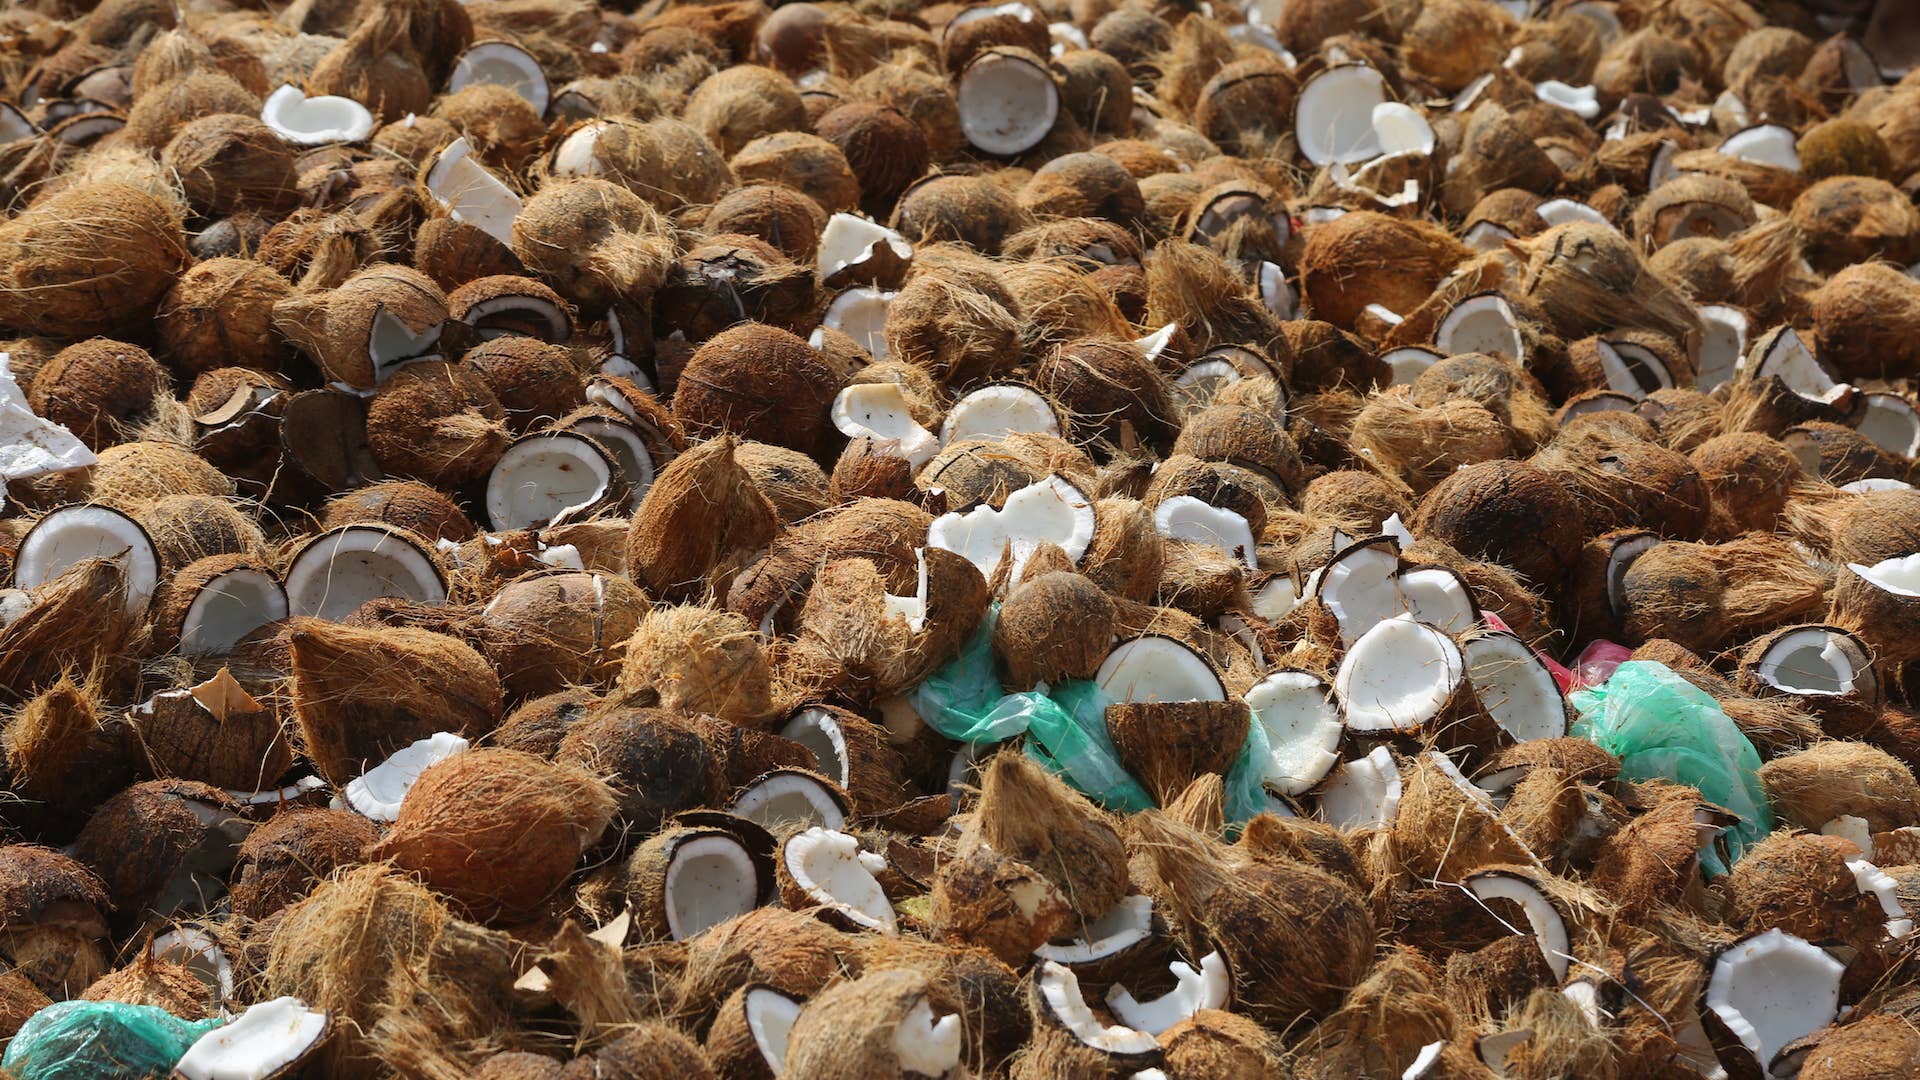 Photograph of smashed coconuts